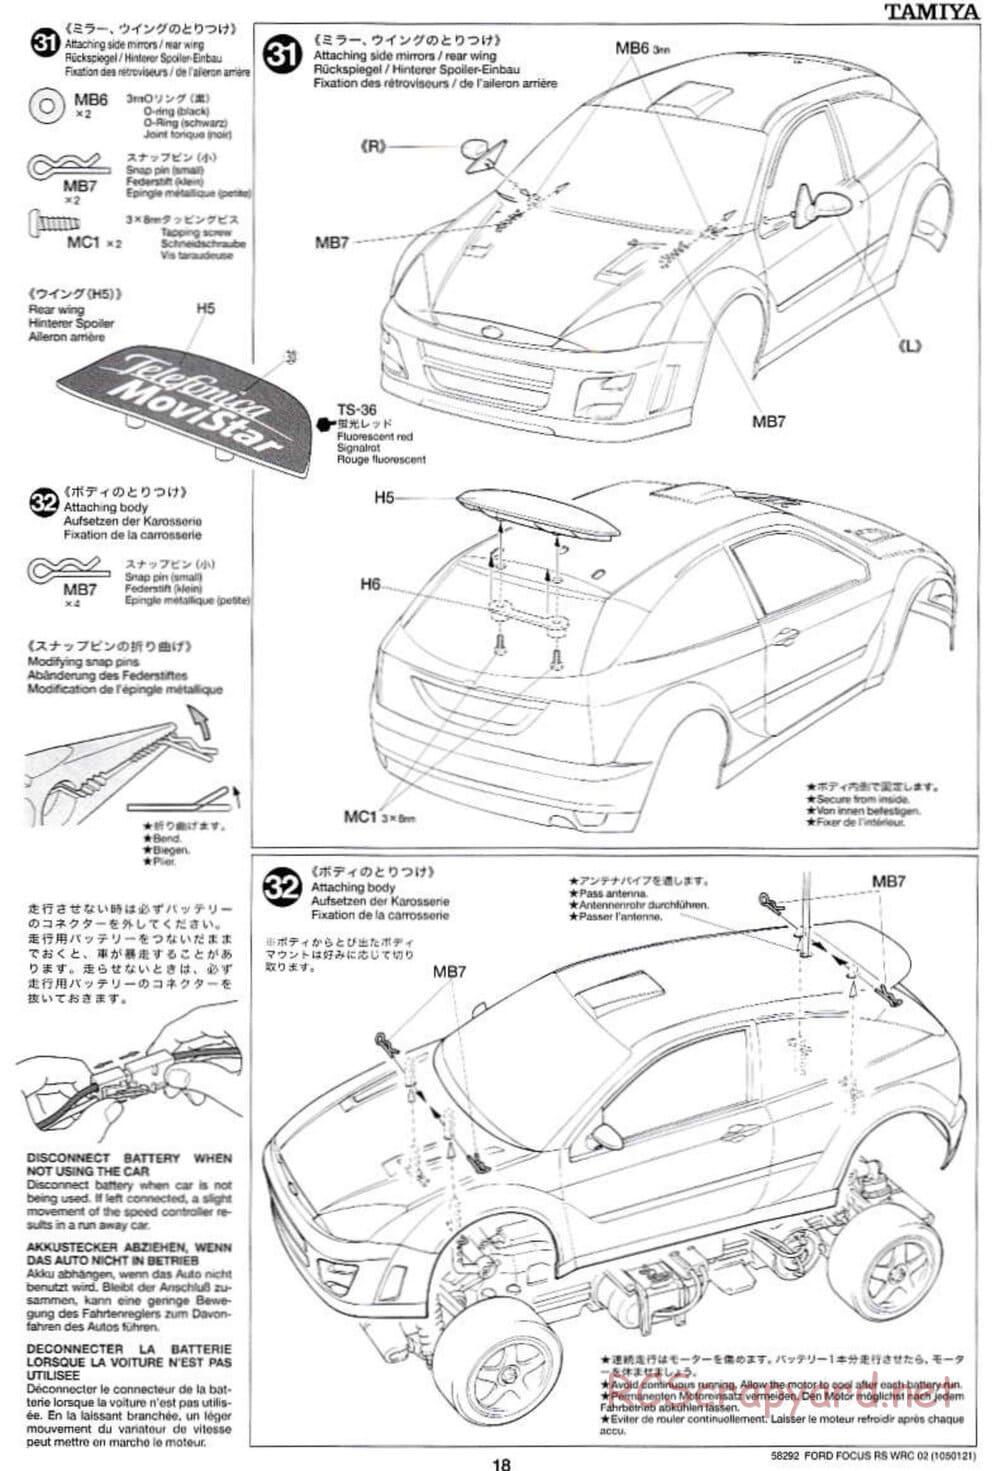 Tamiya - Ford Focus RS WRC 02 - TL-01 Chassis - Manual - Page 18